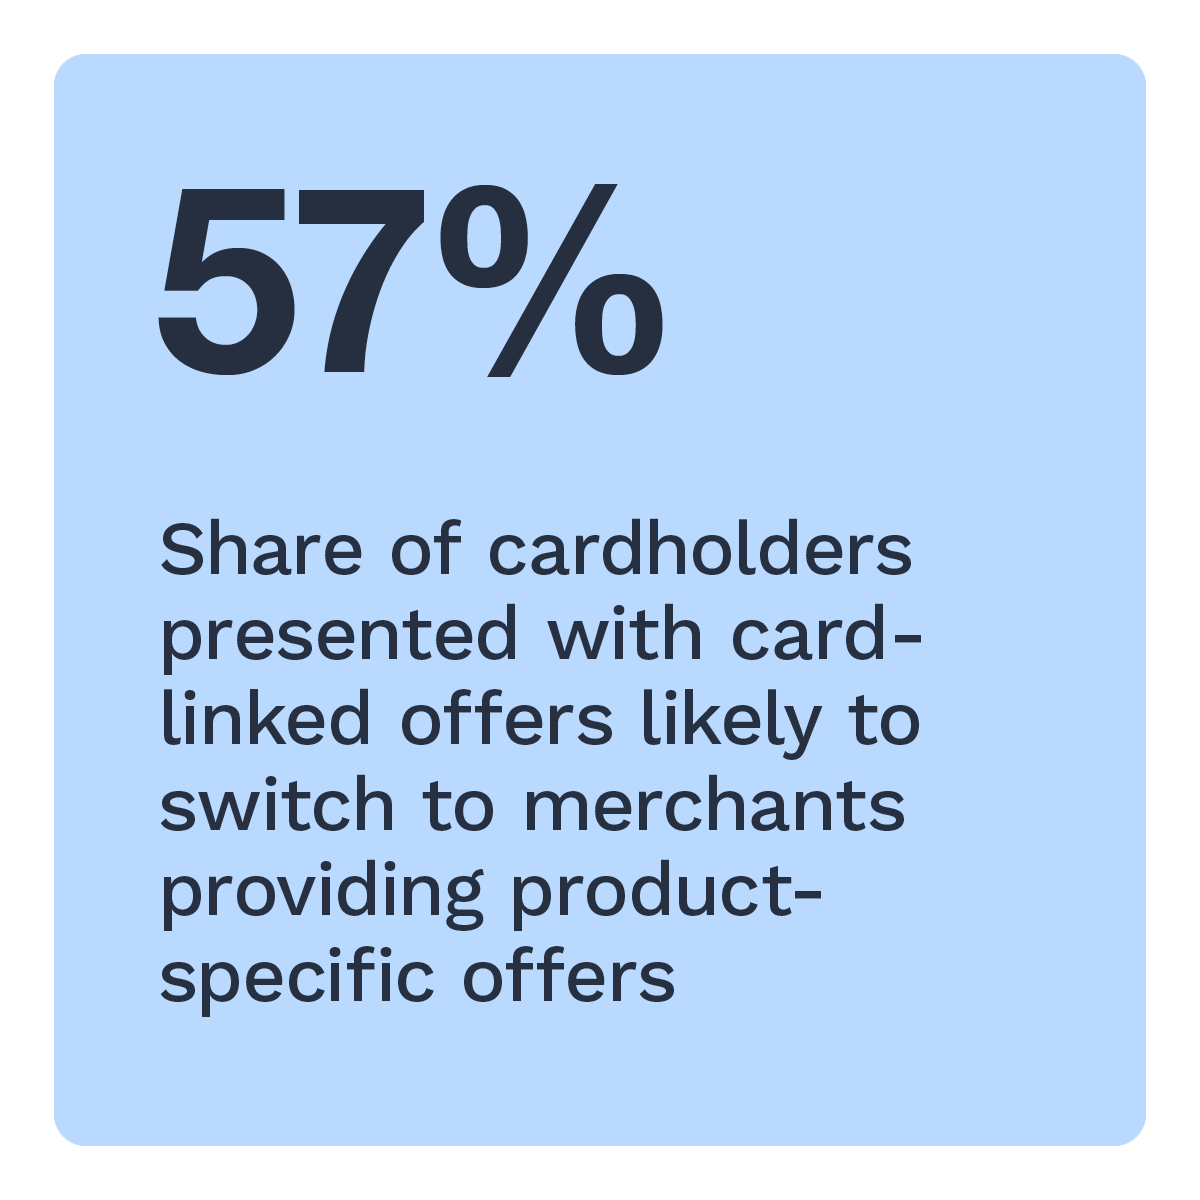 57%: Share of cardholders presented with card-linked offers likely to switch to merchants providing product-specific offers